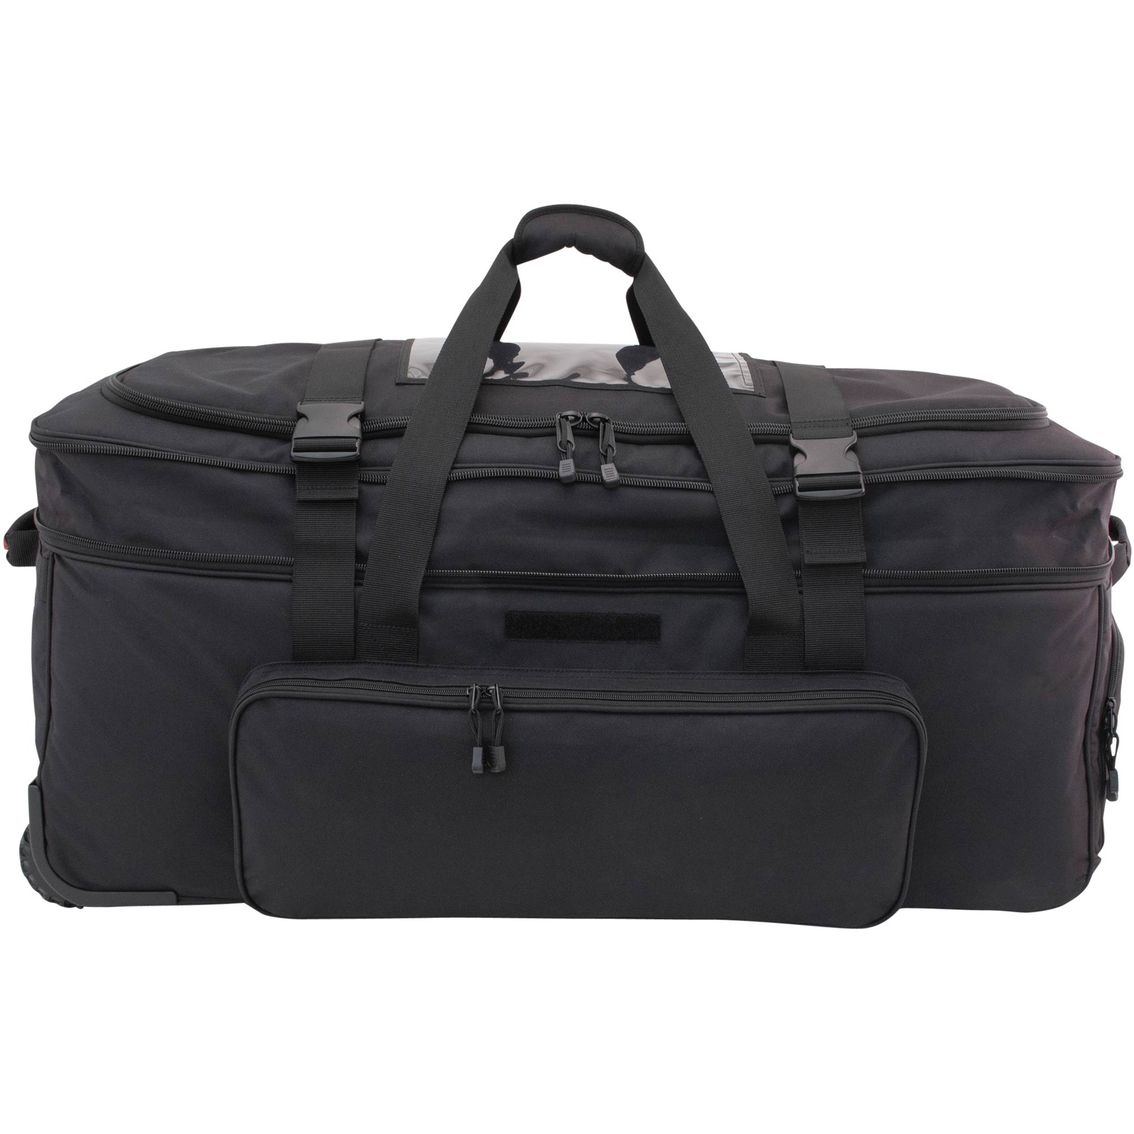 Black 37 Inch Rolling Deployment Bag With Retractable Handle